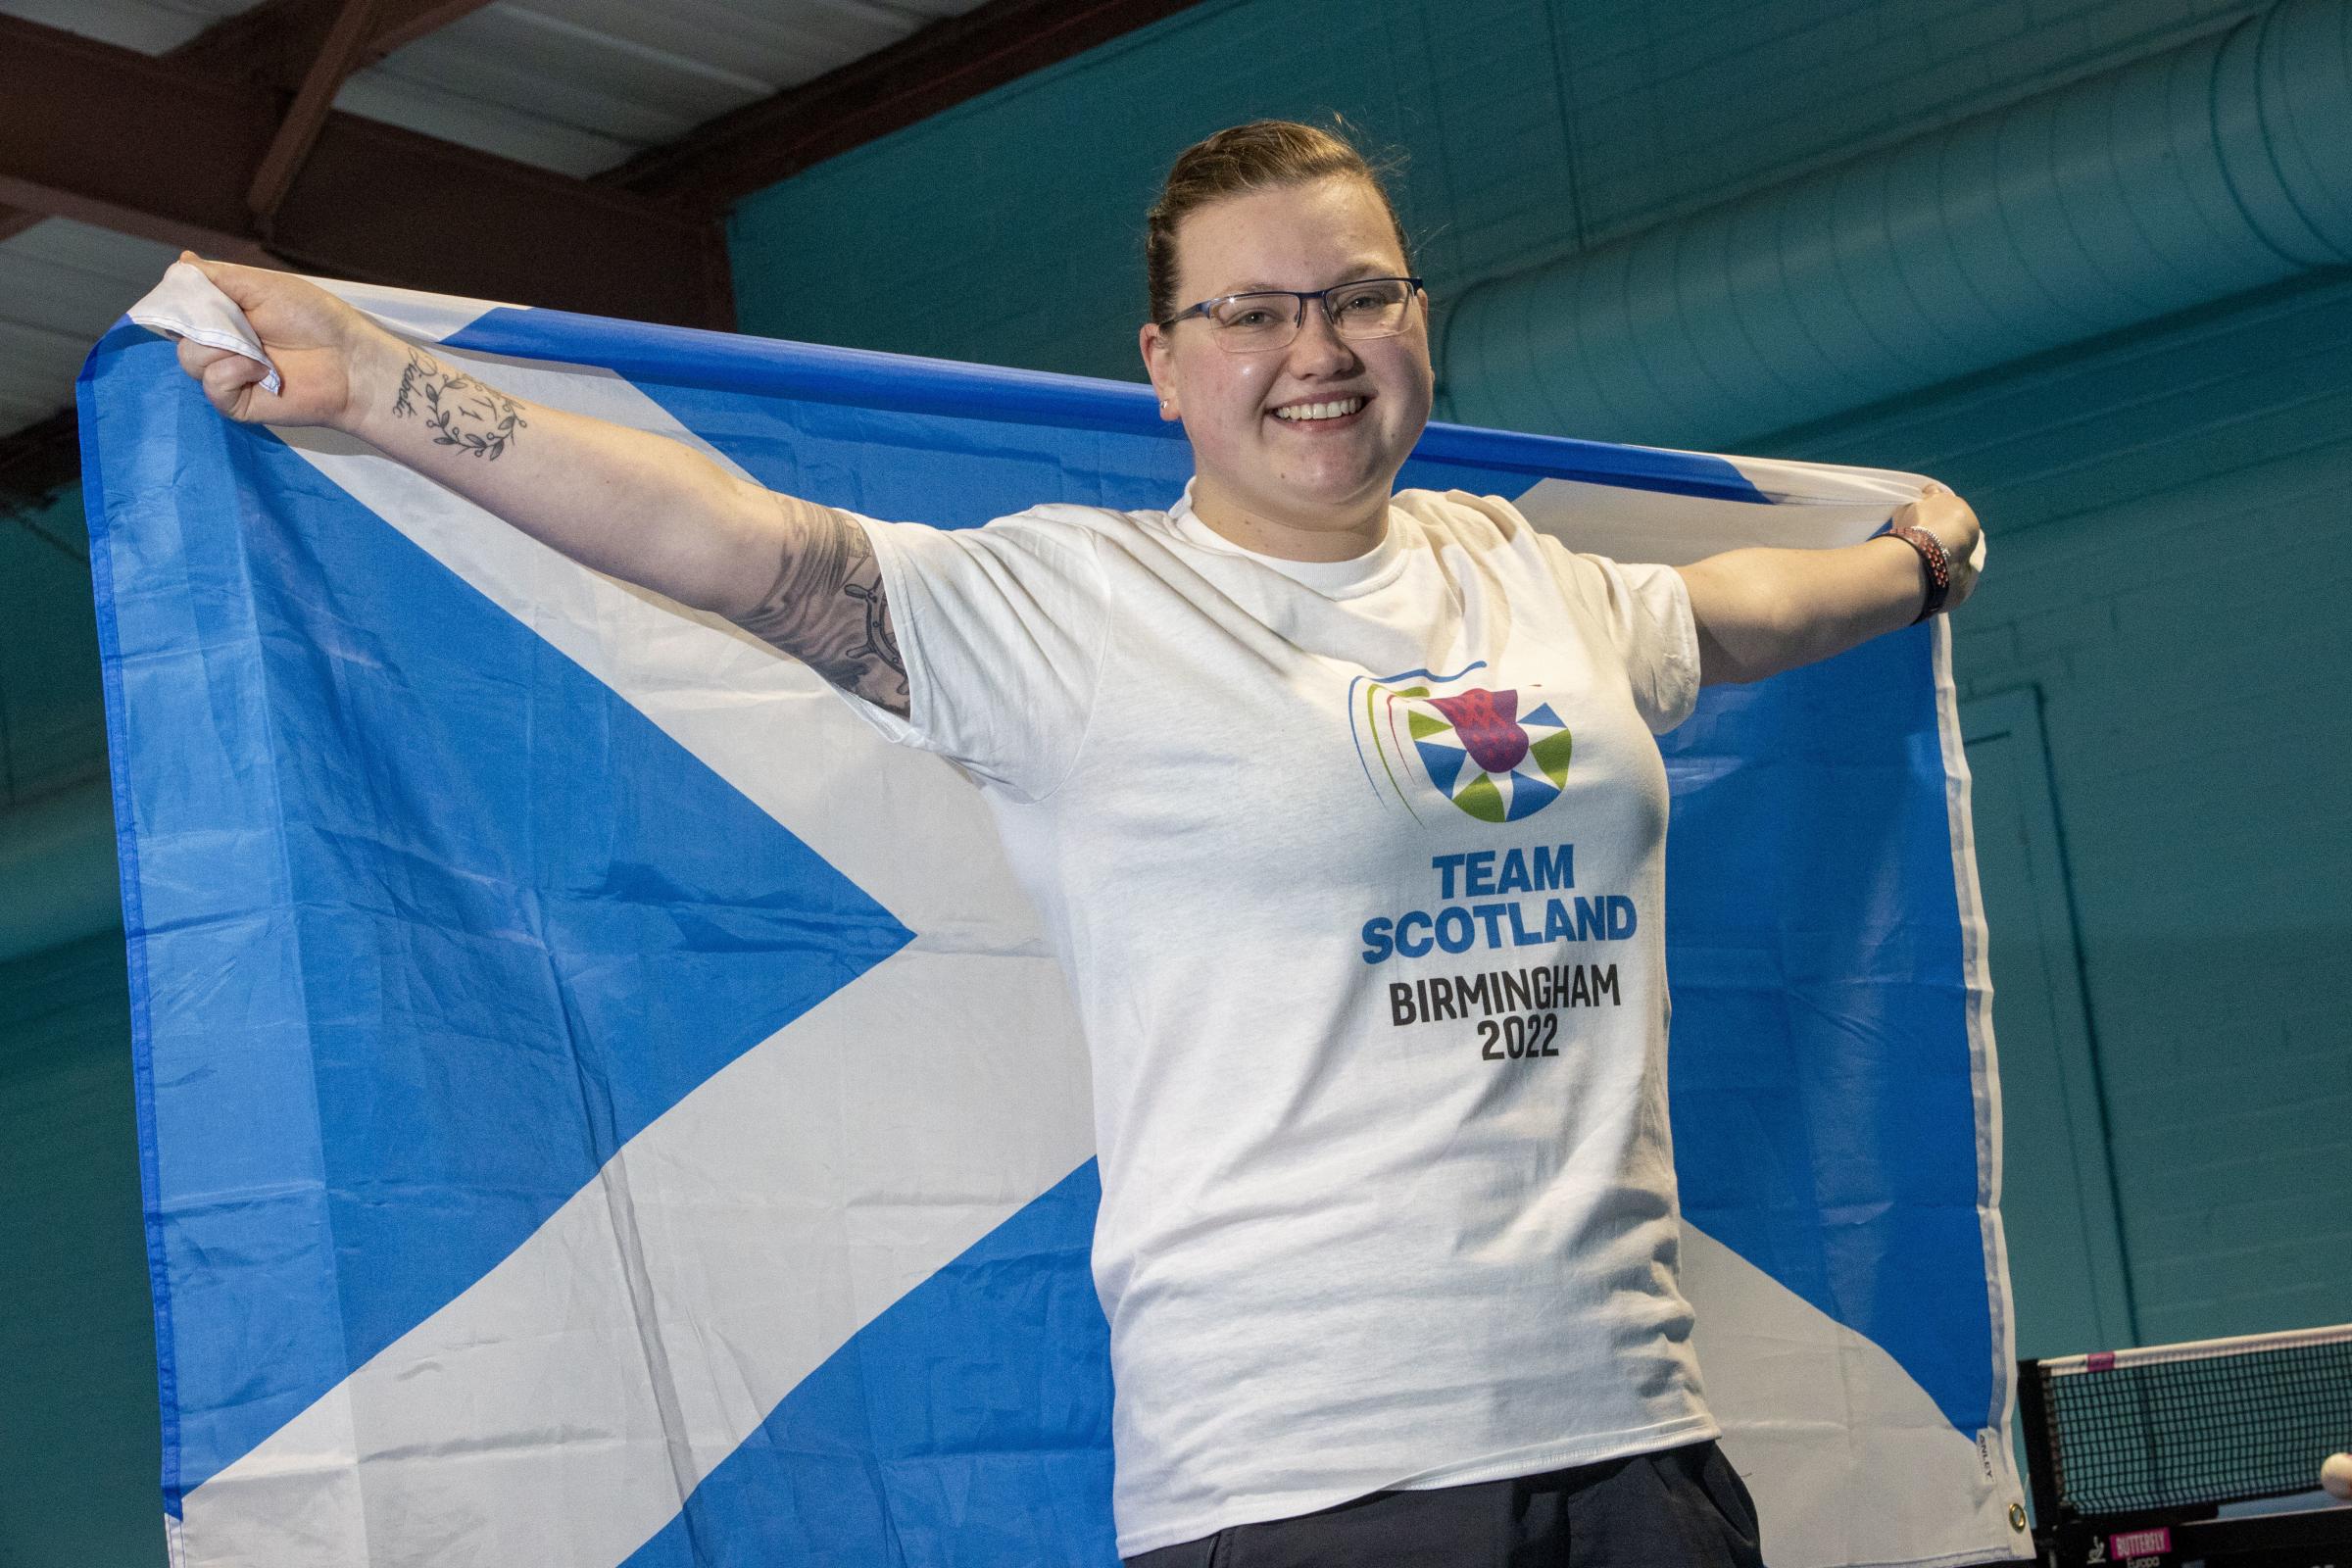 Former Hermitage Academy pupil Lucy Elliot has been named alongside Rebecca Plaistow, Colin Dalgleish and Gavin Rumgay in Team Scotland’s table tennis squad for the Commonwealth Games in Birmingham Table Tennis Lucy Elliot